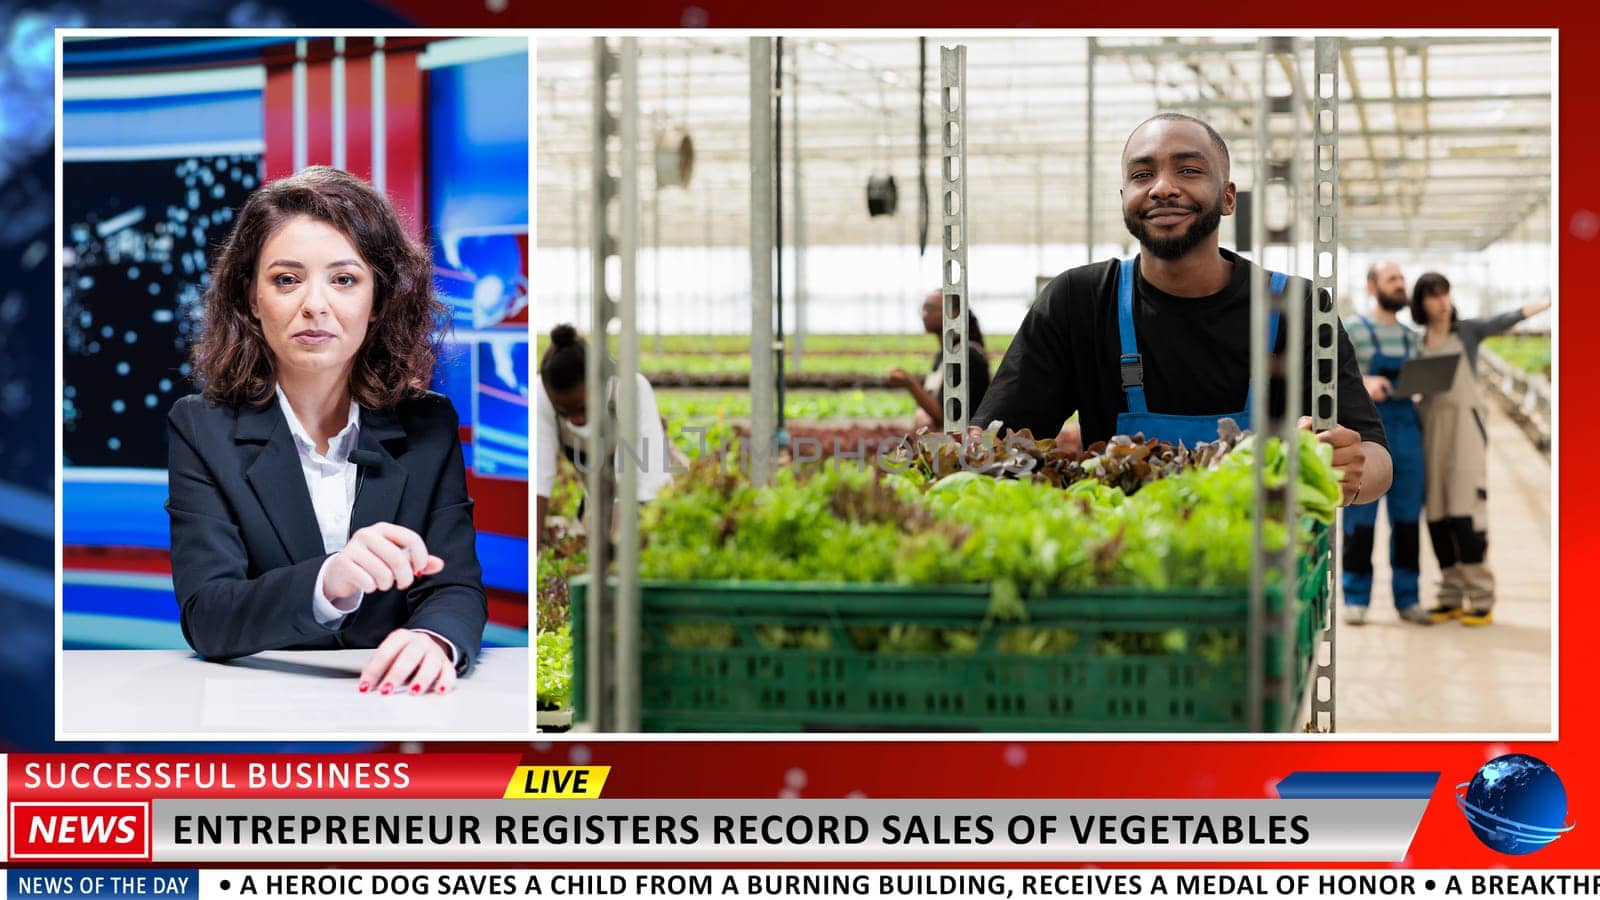 New farming business reported by anchrowoman, talking about small business owner growing healthy produce in greenhouse. News reporter covering creative business ideas live on tv.